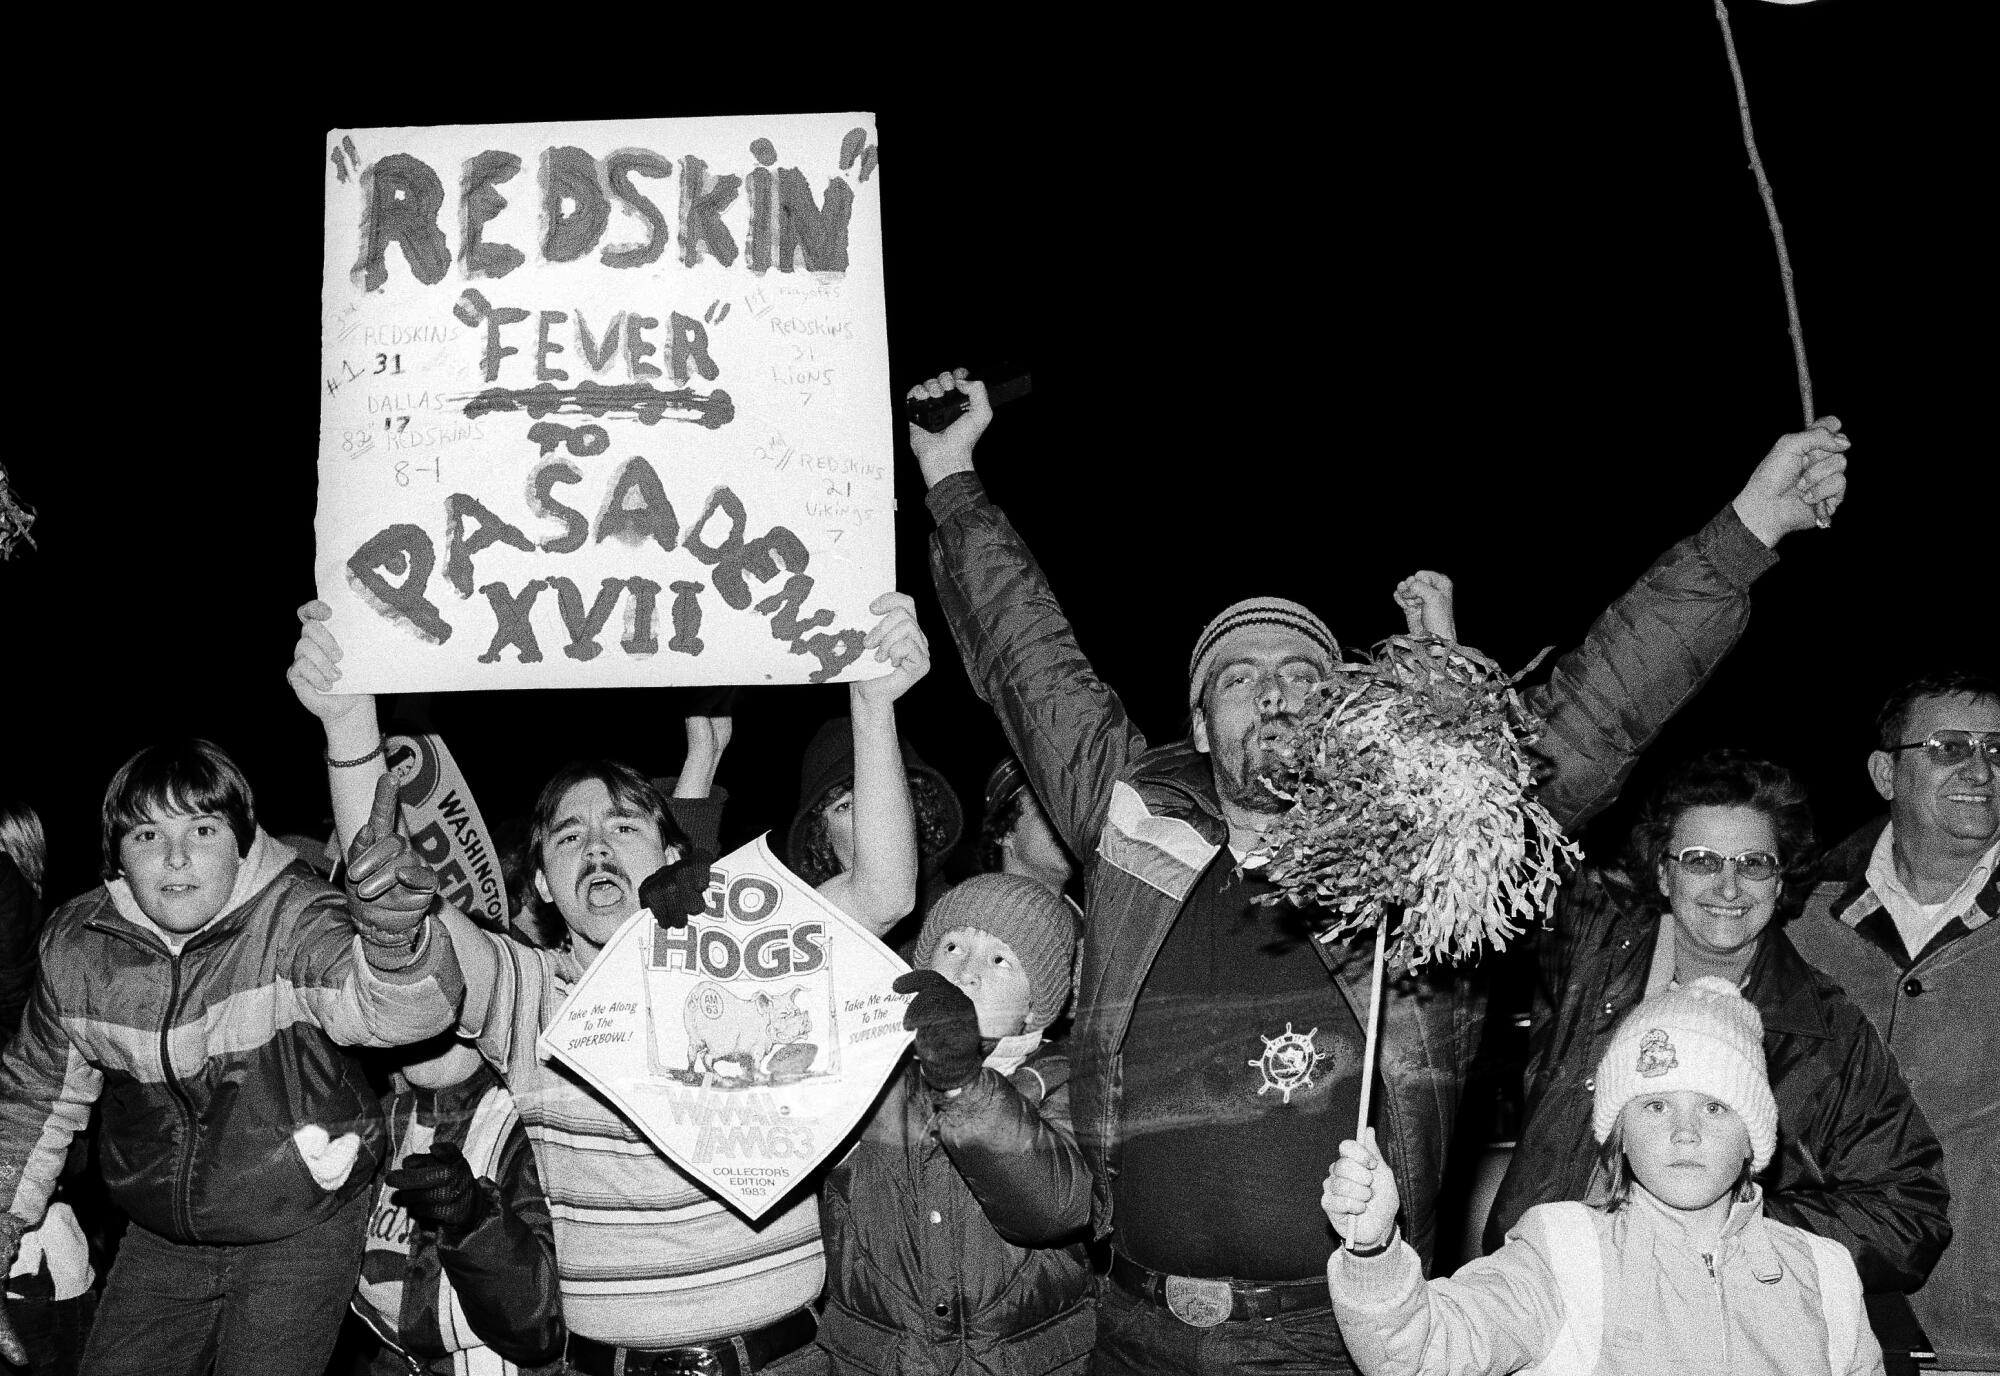 Washington fans wave signs as members of the team leave Redskins Park